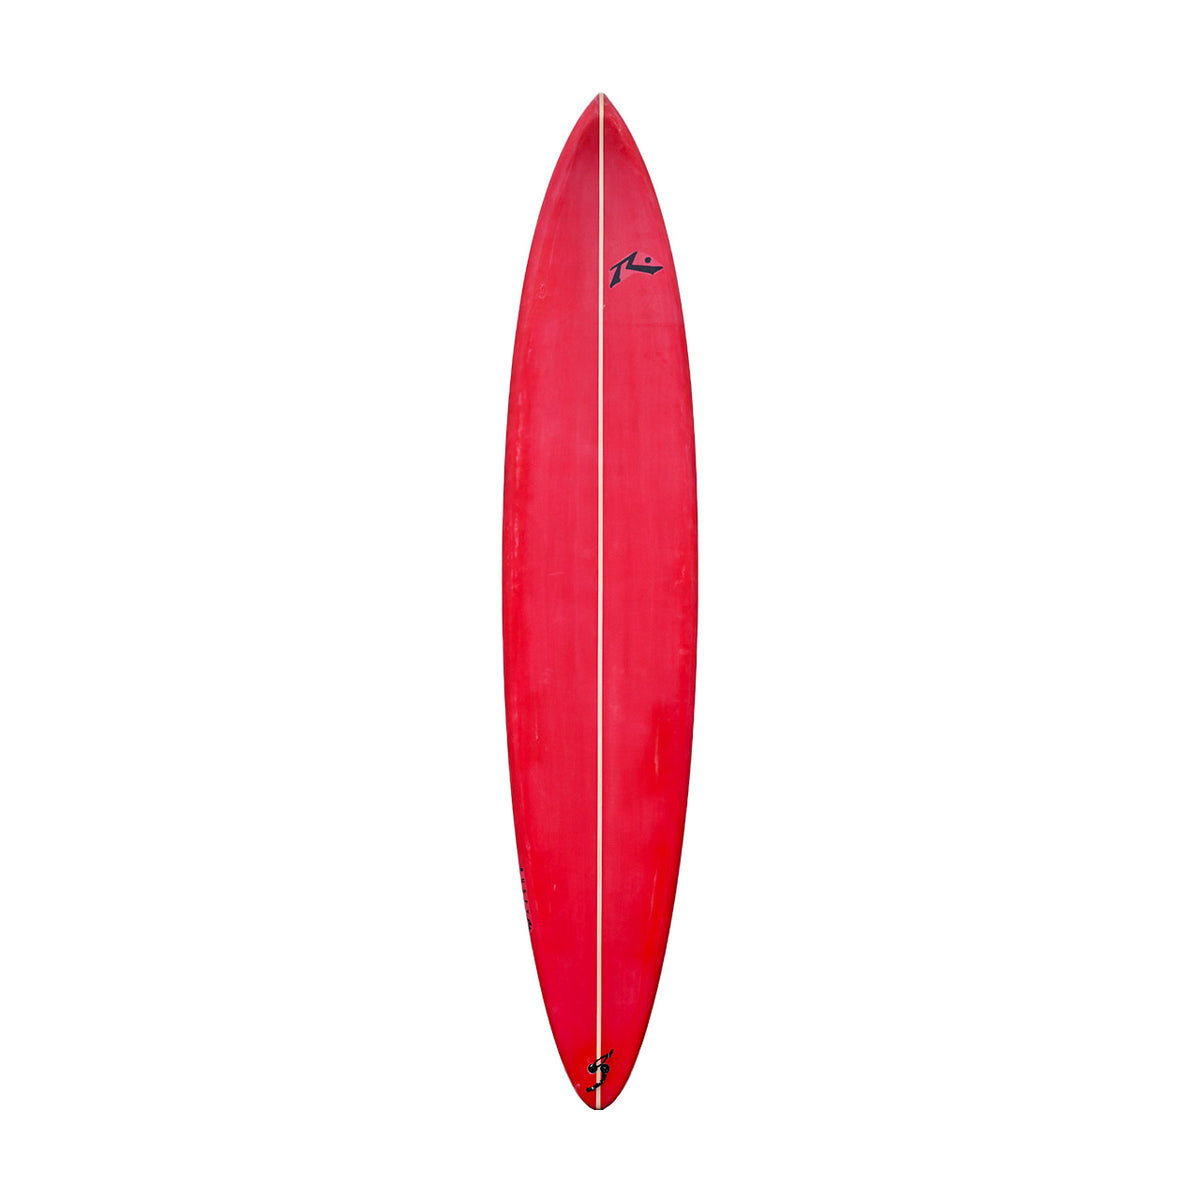 Rusty Gun - Rounded Pin - Quad - Rusty Surfboards - Deck View